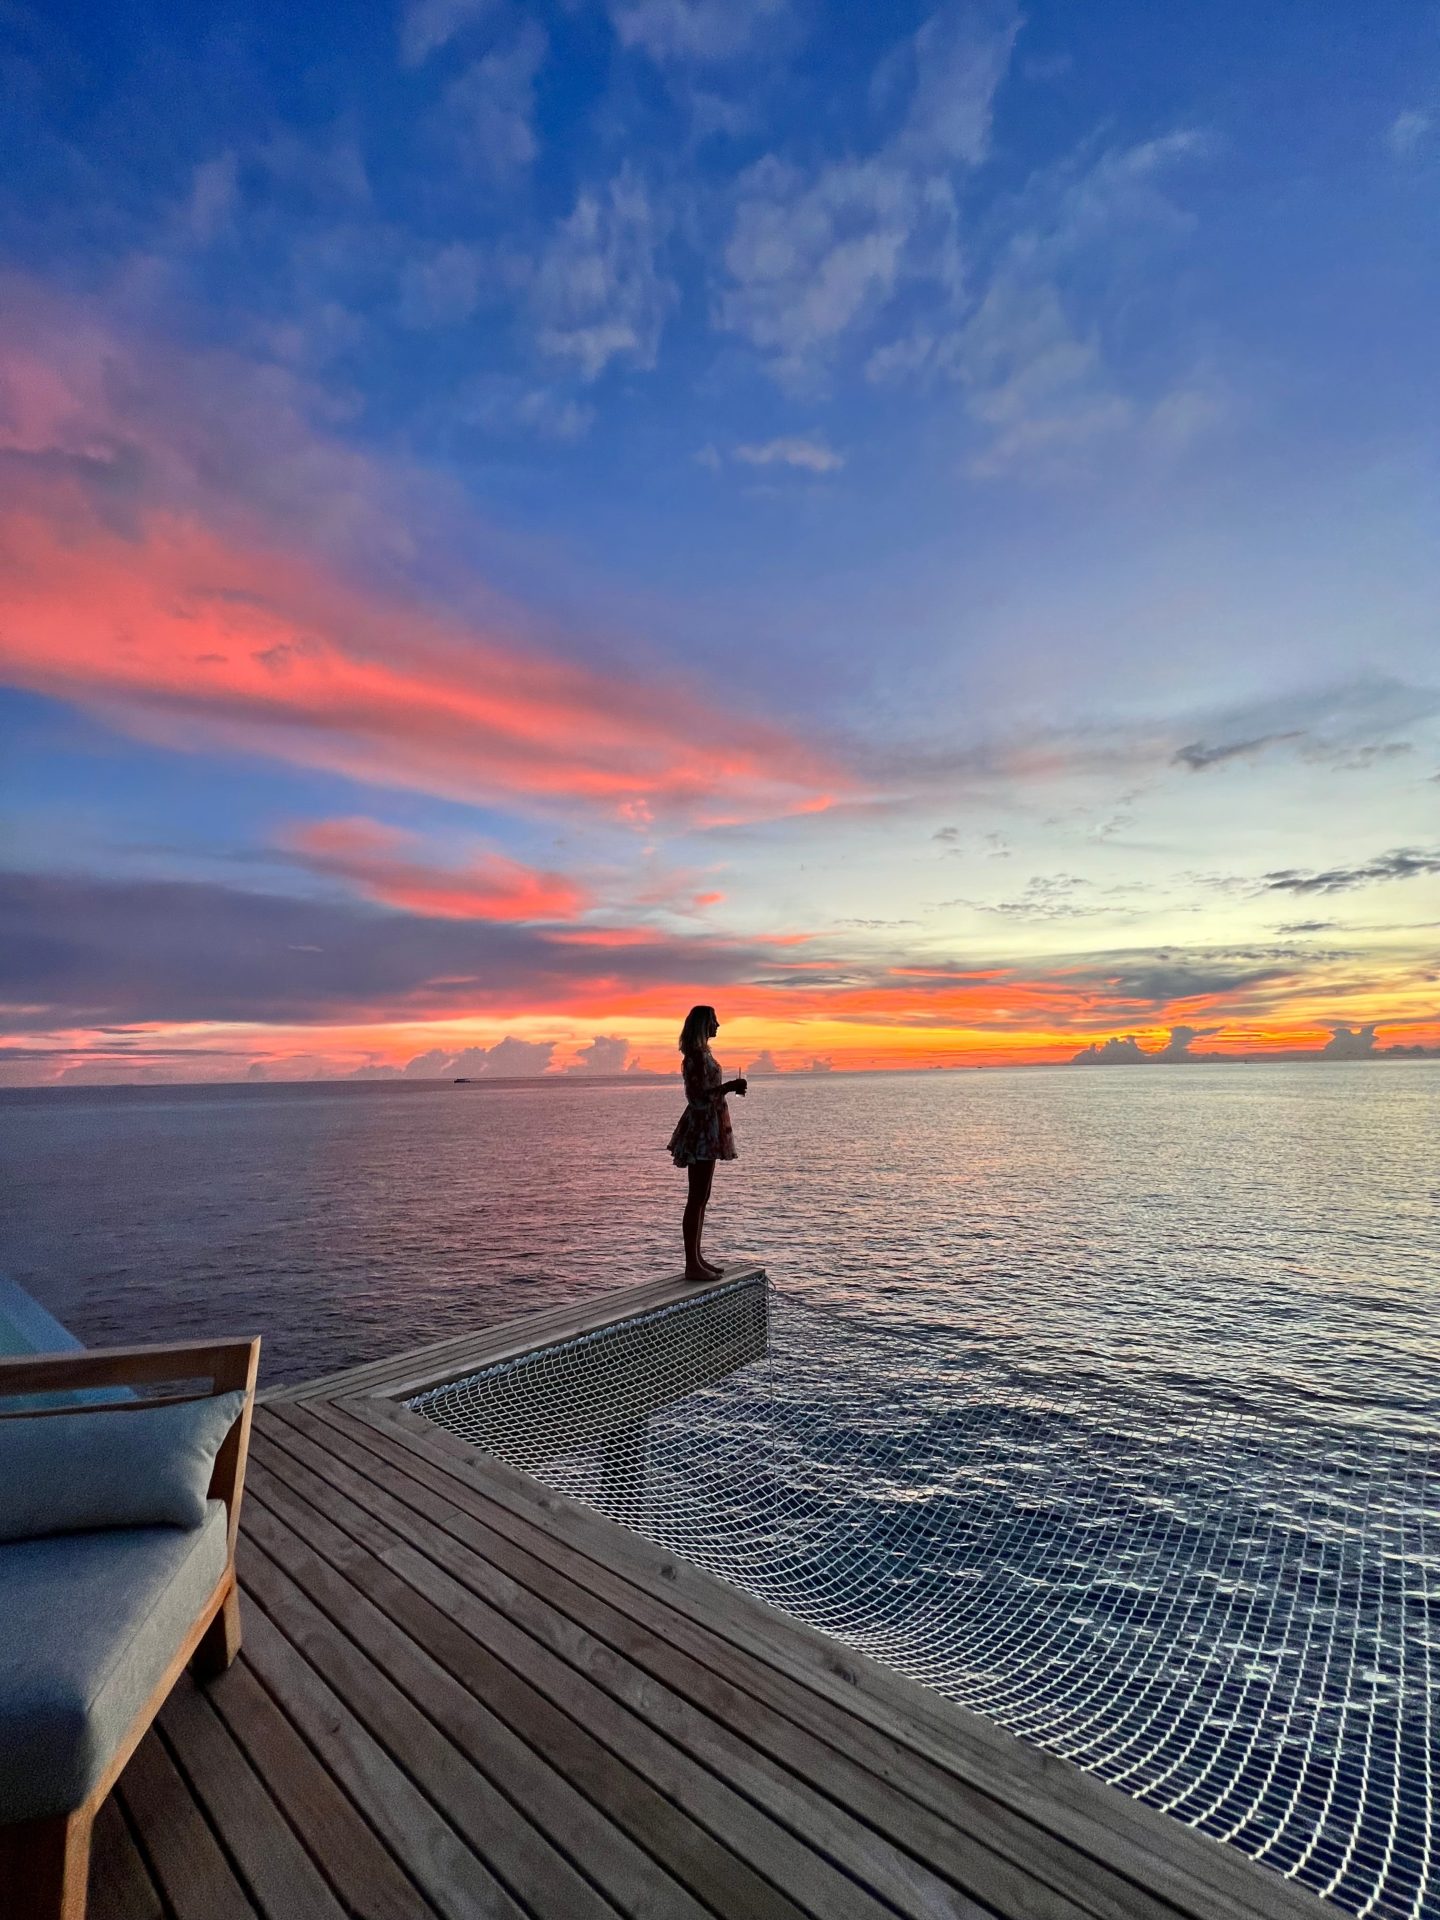 Zanna van Dijk looking out to sea at sunset in the Maldives